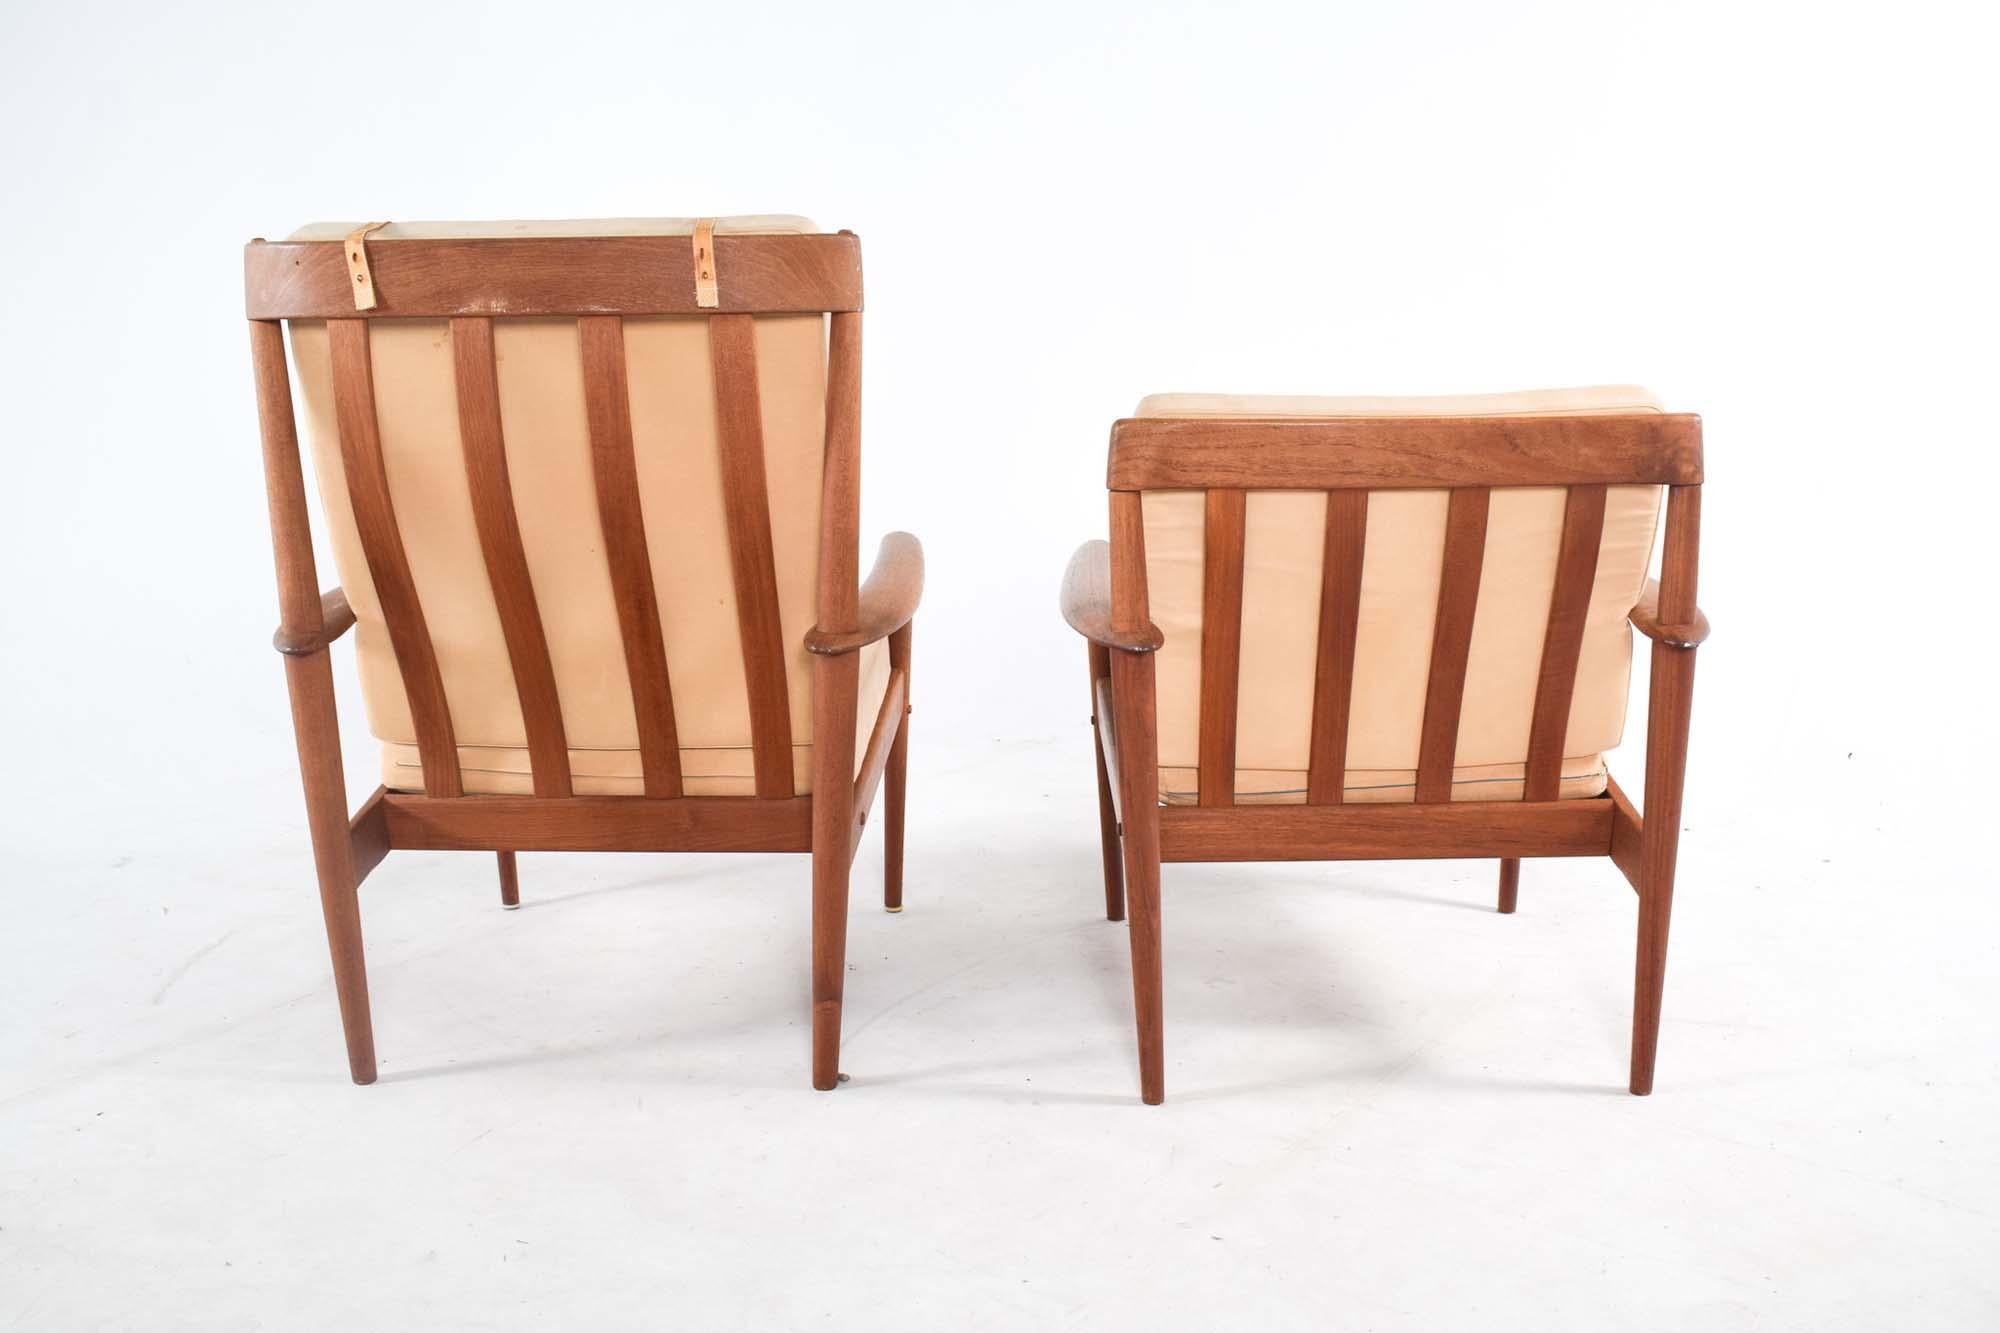 Pair of Teak Armchairs by Grete Jalk by Poul Jeppesen in 1956 In Good Condition For Sale In Lisboa, Lisboa